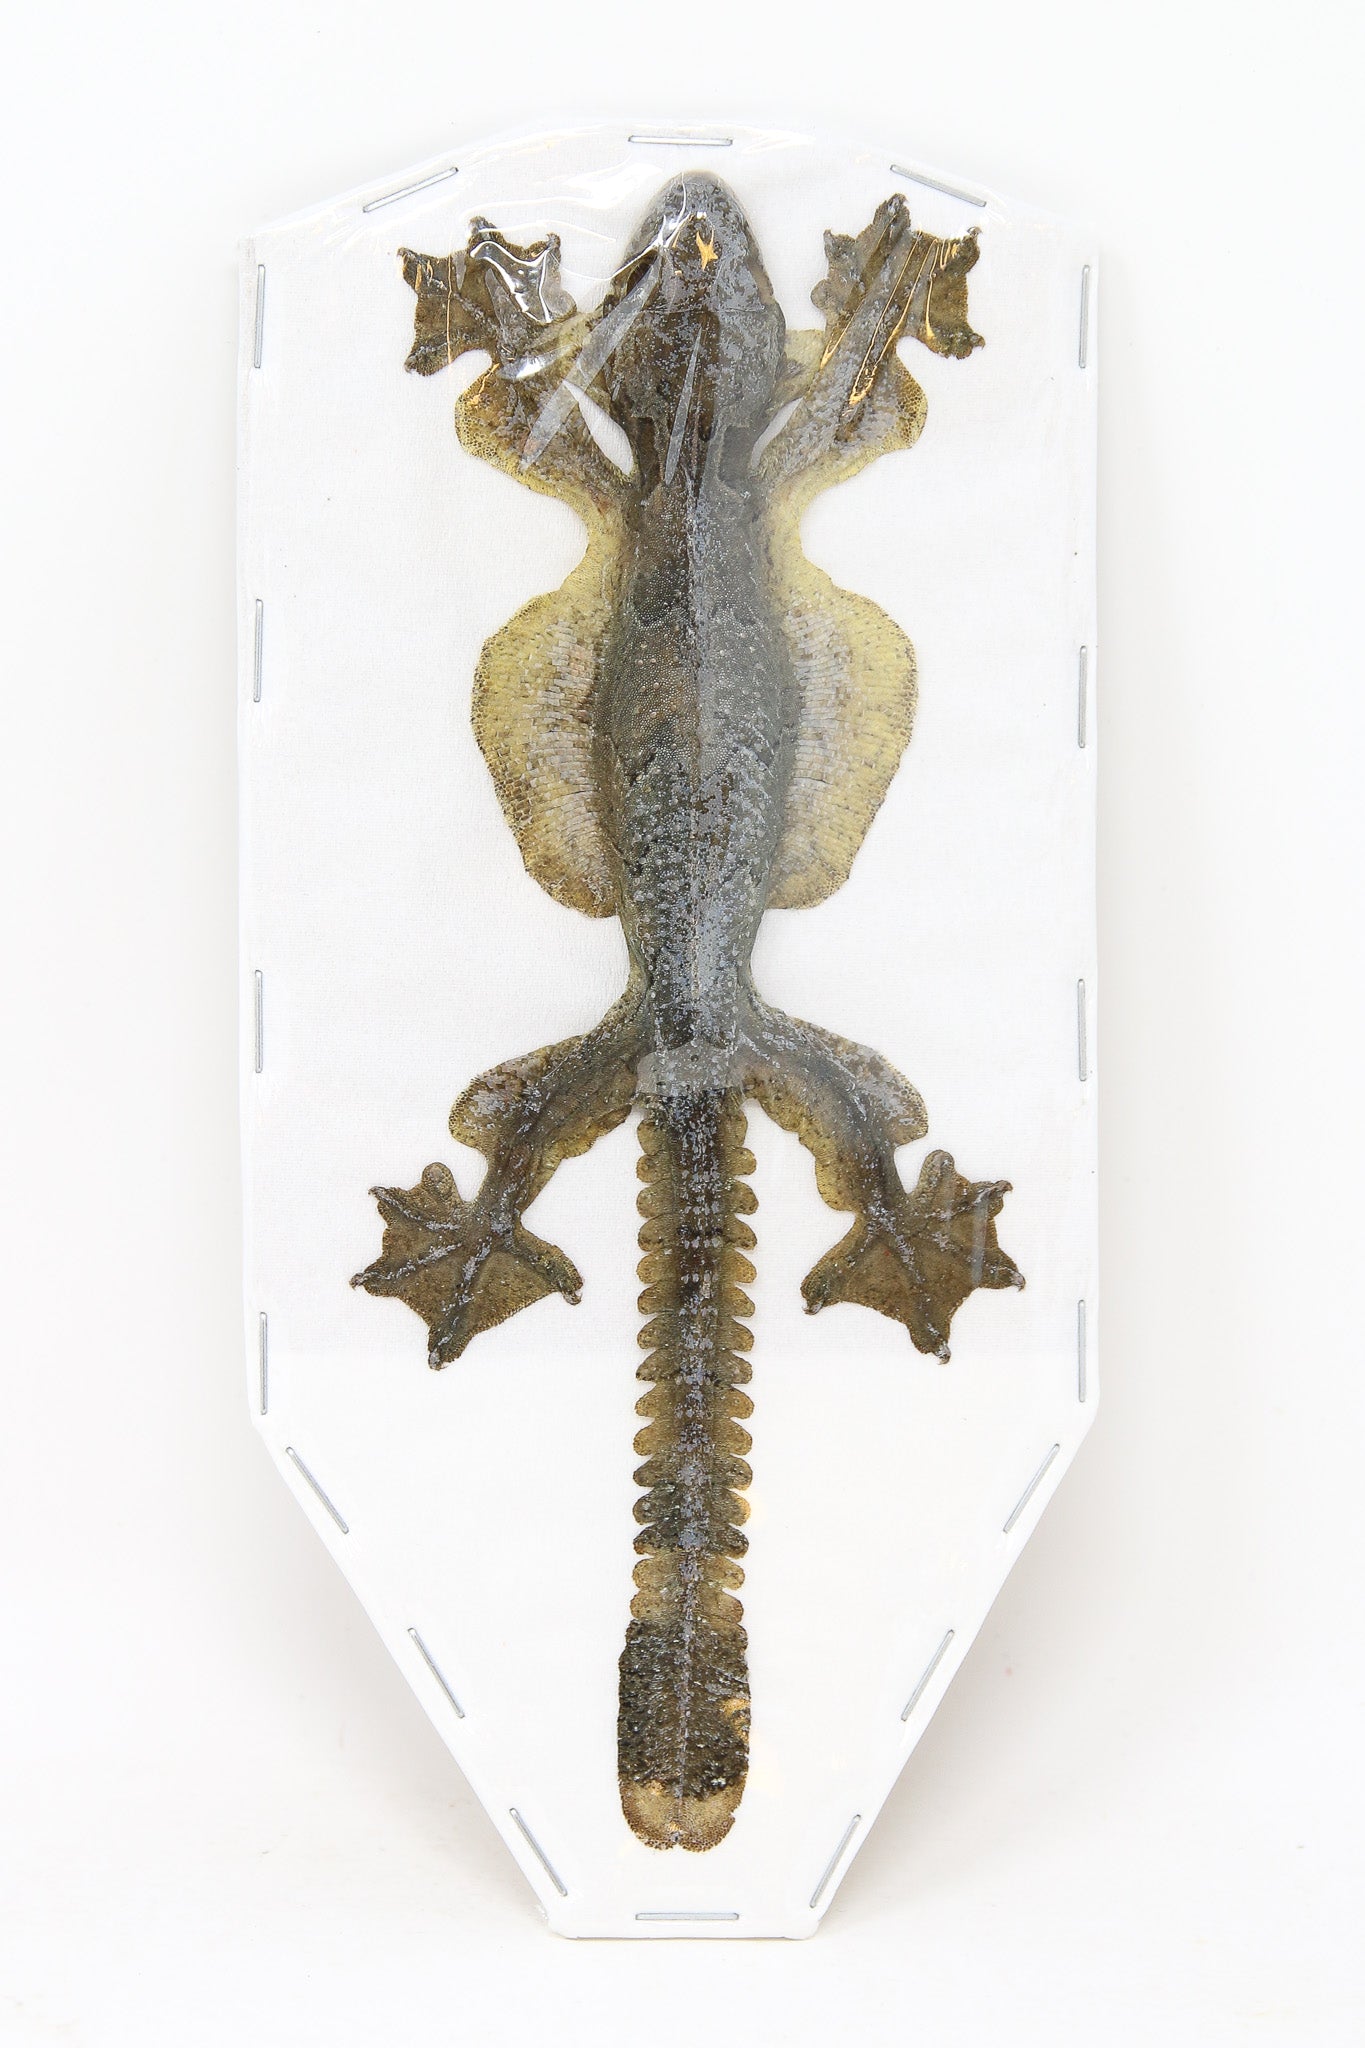 TWO (2) Kuhl's Flying Geckos | Ptychozoon kuhli | Dry-preserved spread specimens for framing, collecting, studying